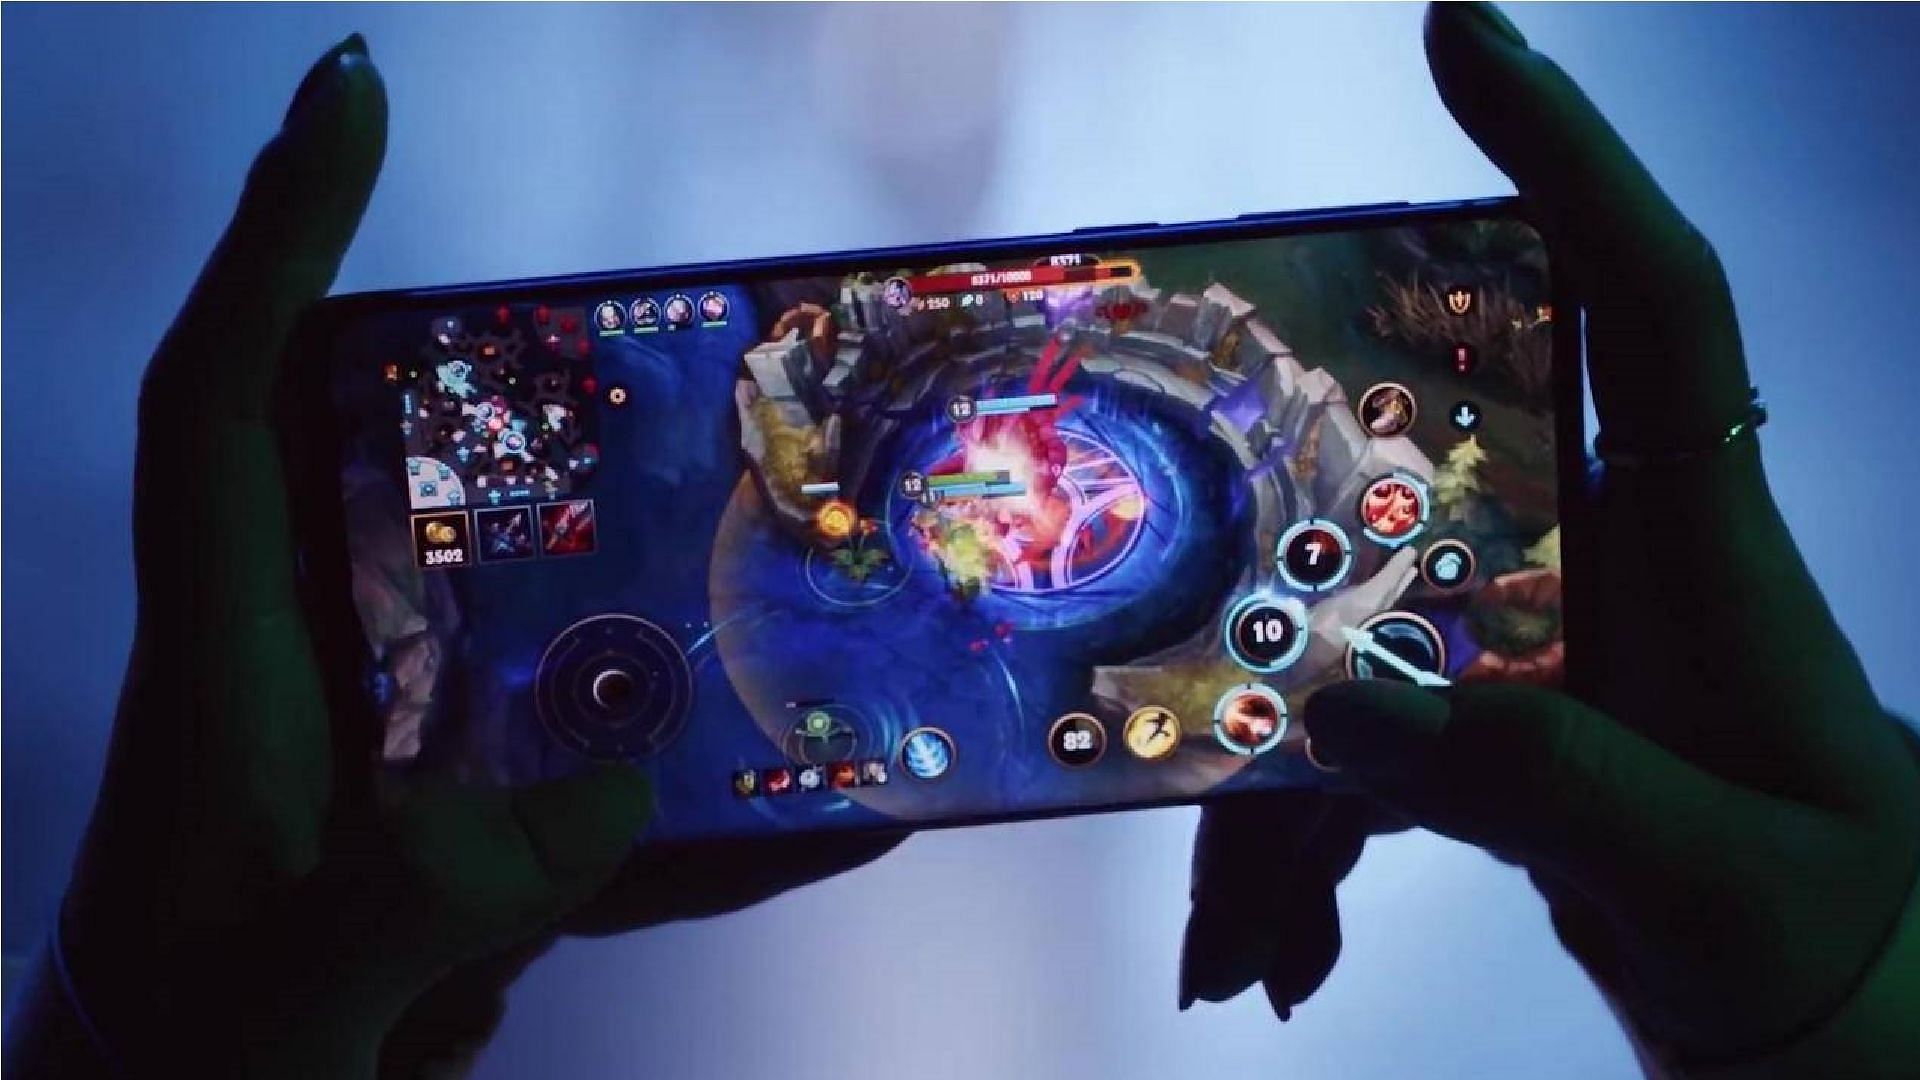 Wild Rift vs Mobile Legends: Which mobile MOBA would fit your playstyle the  best